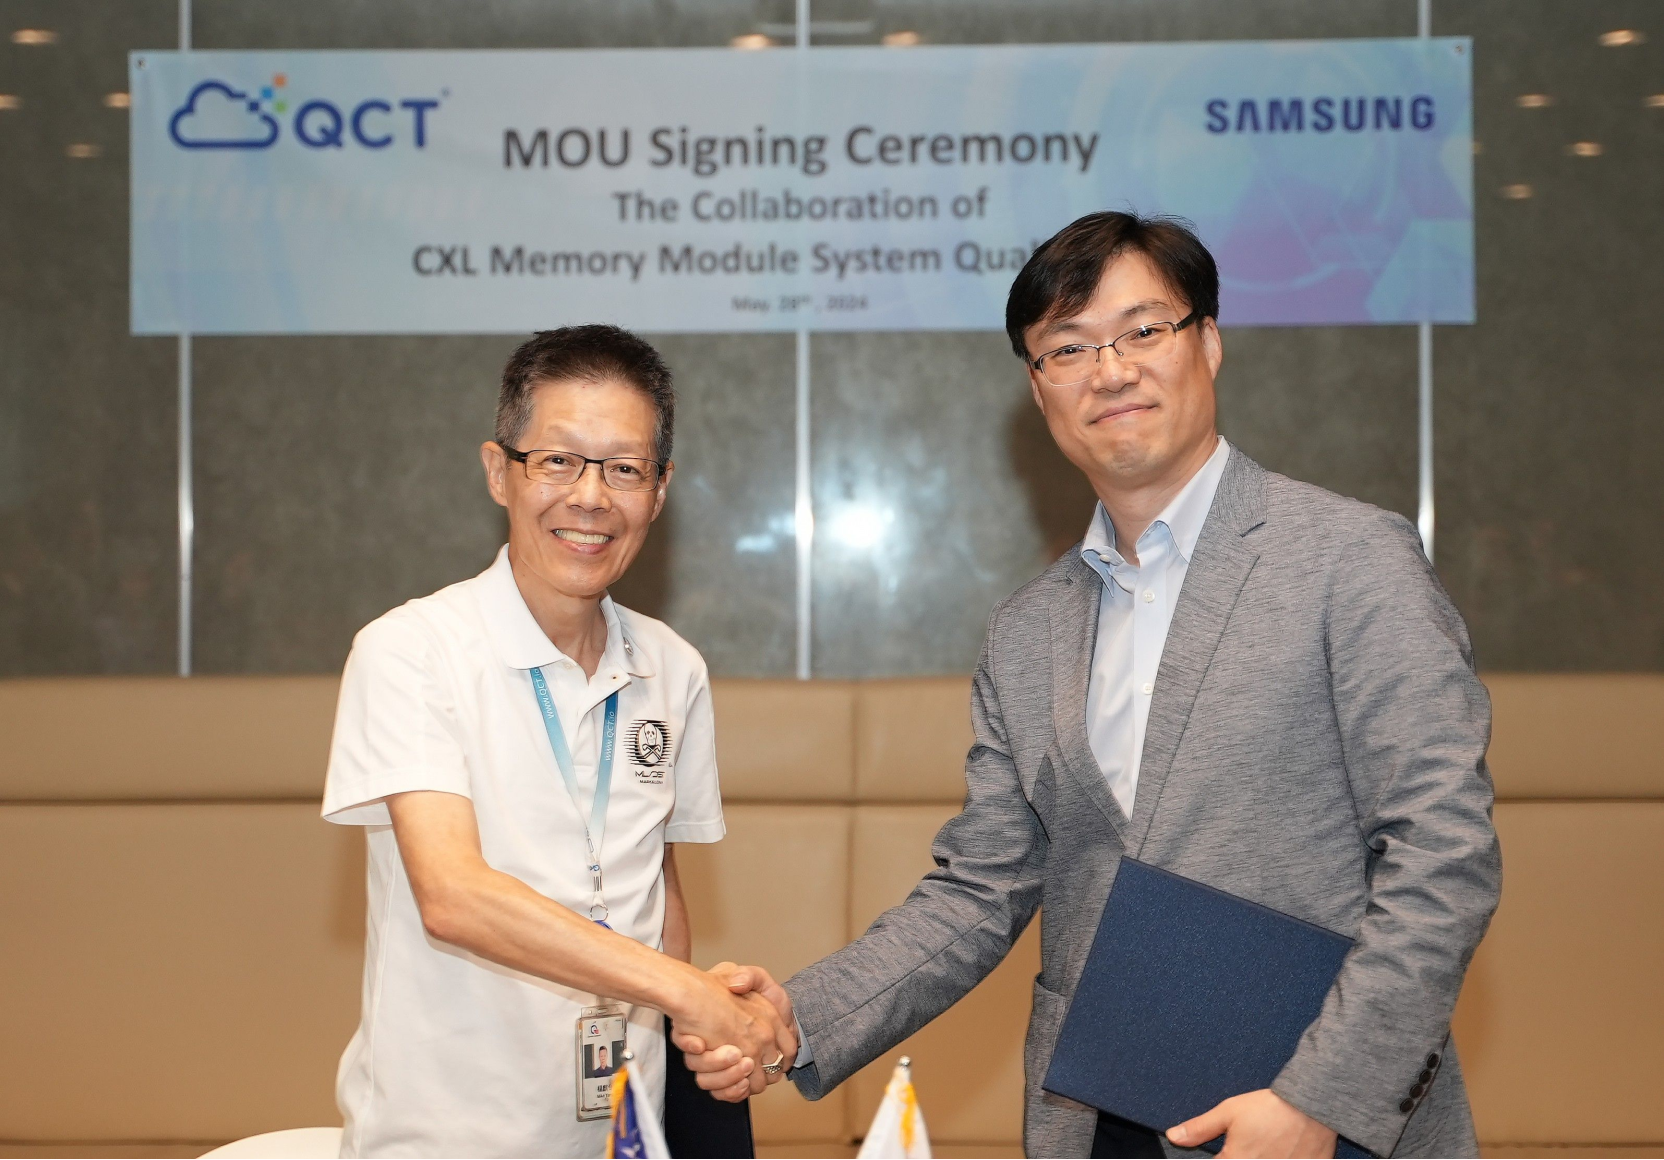 A scene where Samsung Electronics and QCT, a global data center and 5G solution provider, formalize their cooperation by signing a Memorandum of Understanding (MOU) between the two companies.